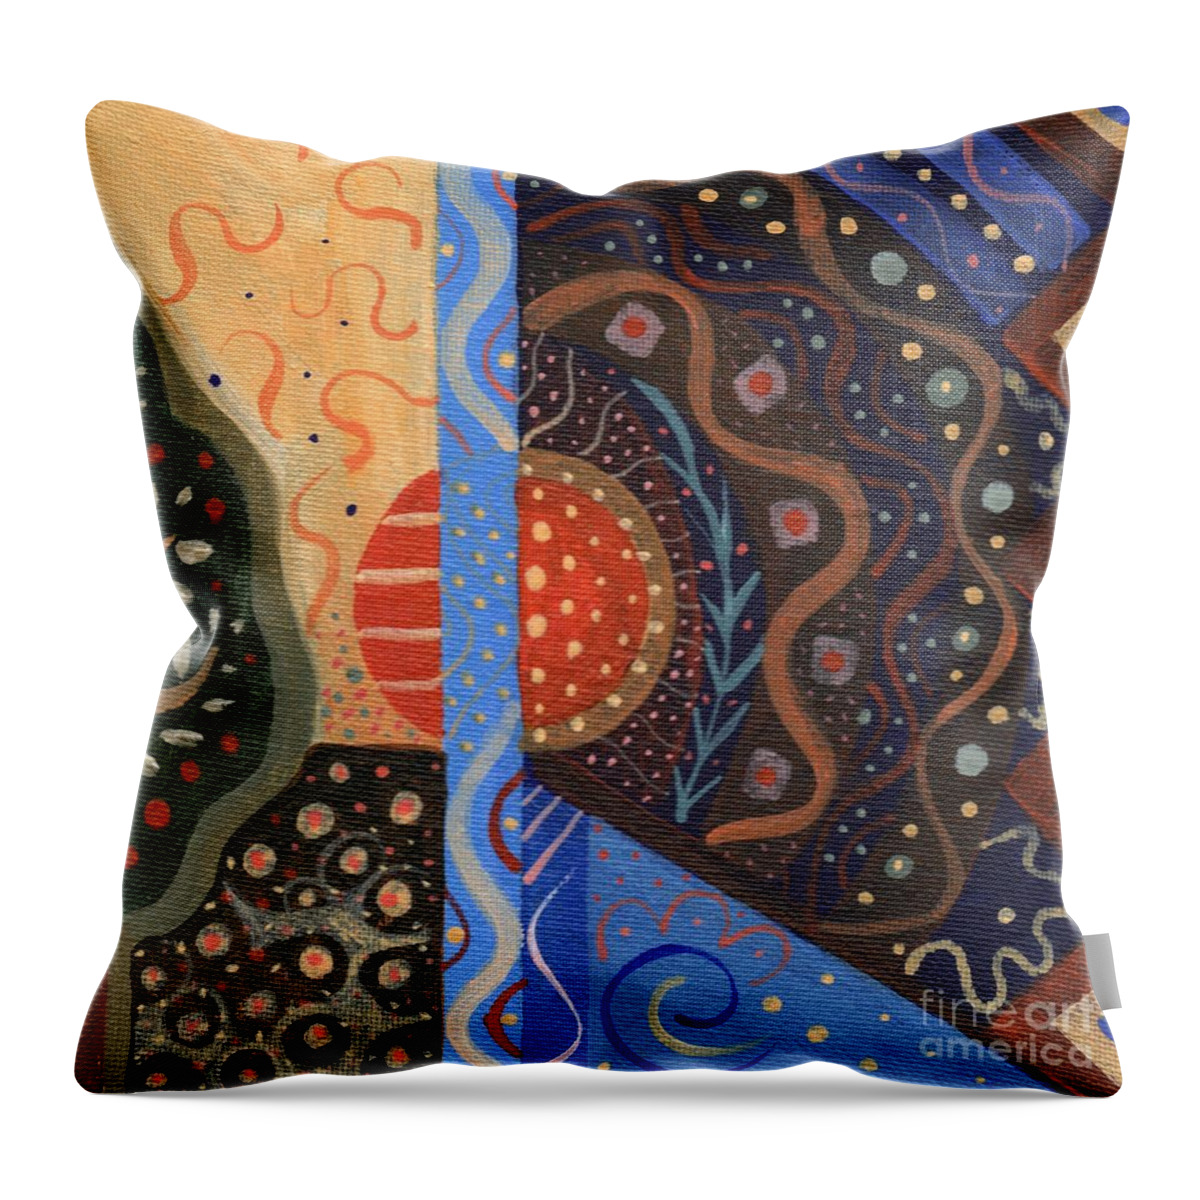 The Joy Of Design Lxii By Helena Tiainen Throw Pillow featuring the painting The Joy of Design LXII by Helena Tiainen